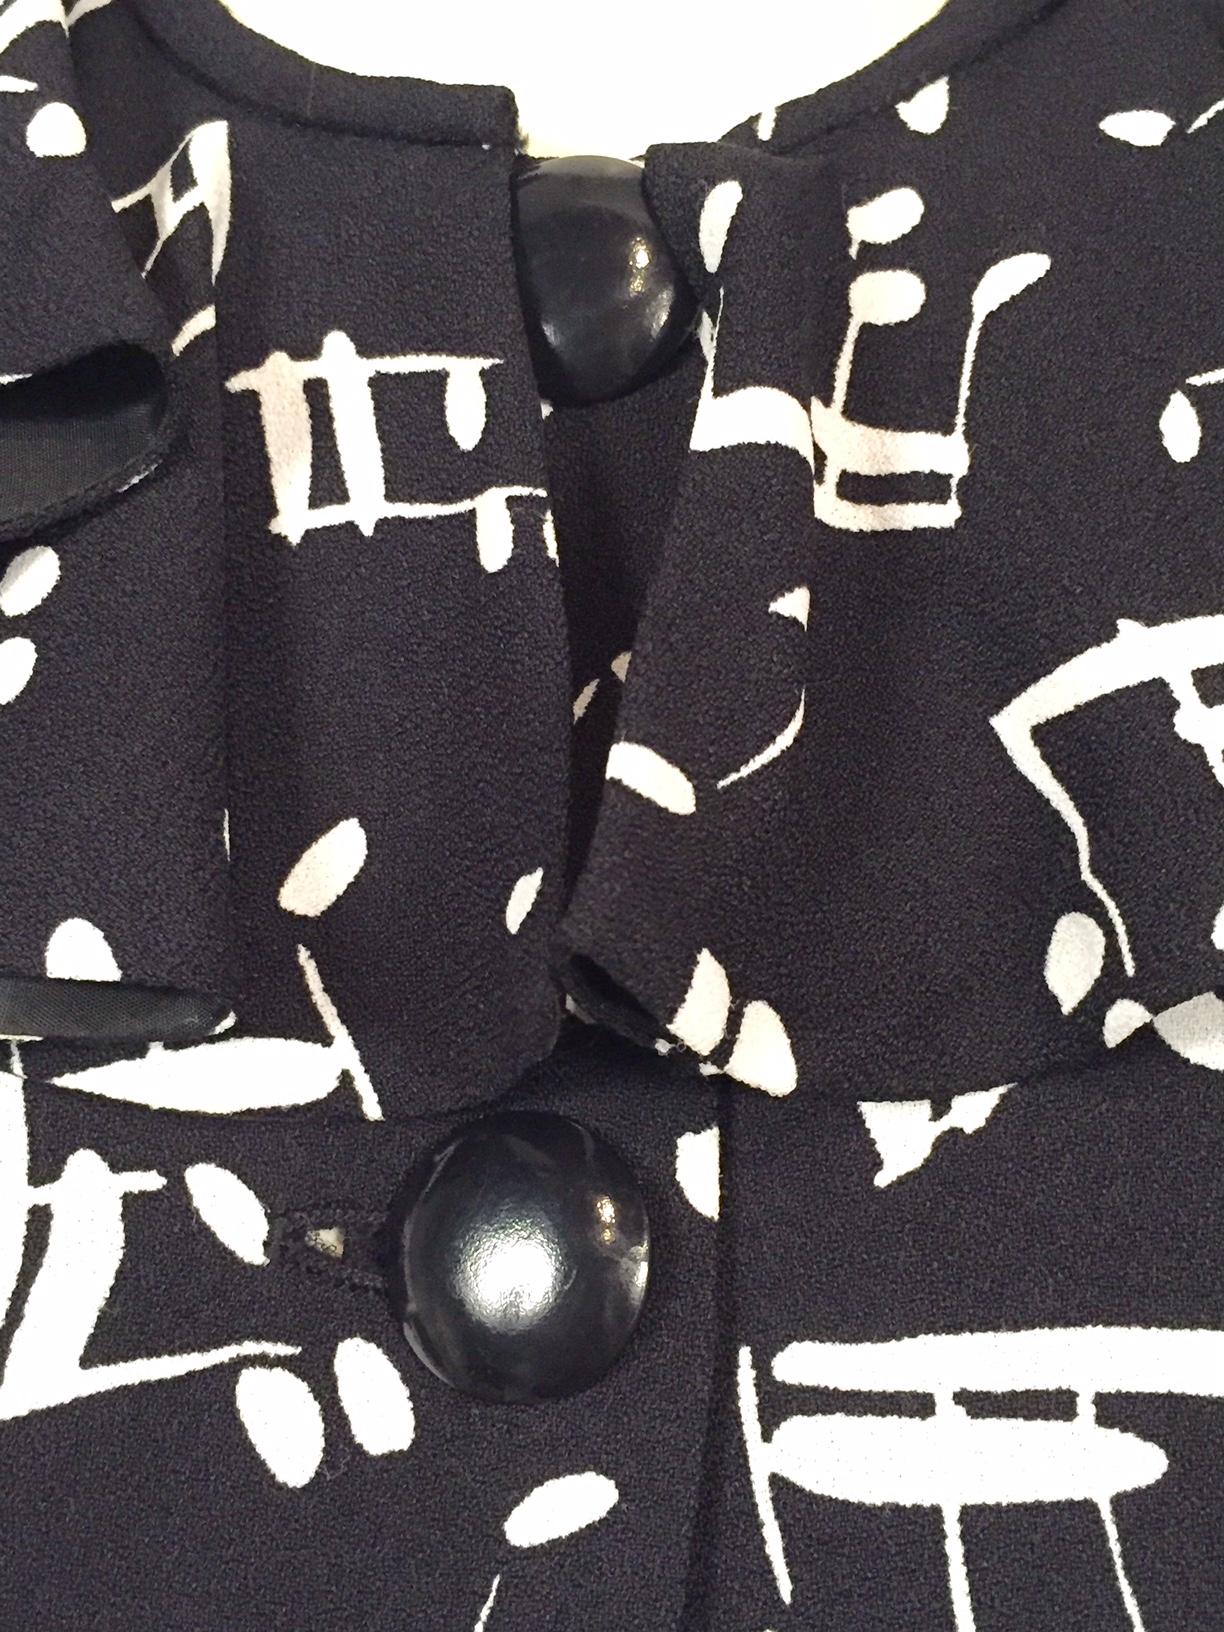 Women's Yves Saint Laurent Two Piece Dress Music Notes Black and White Print